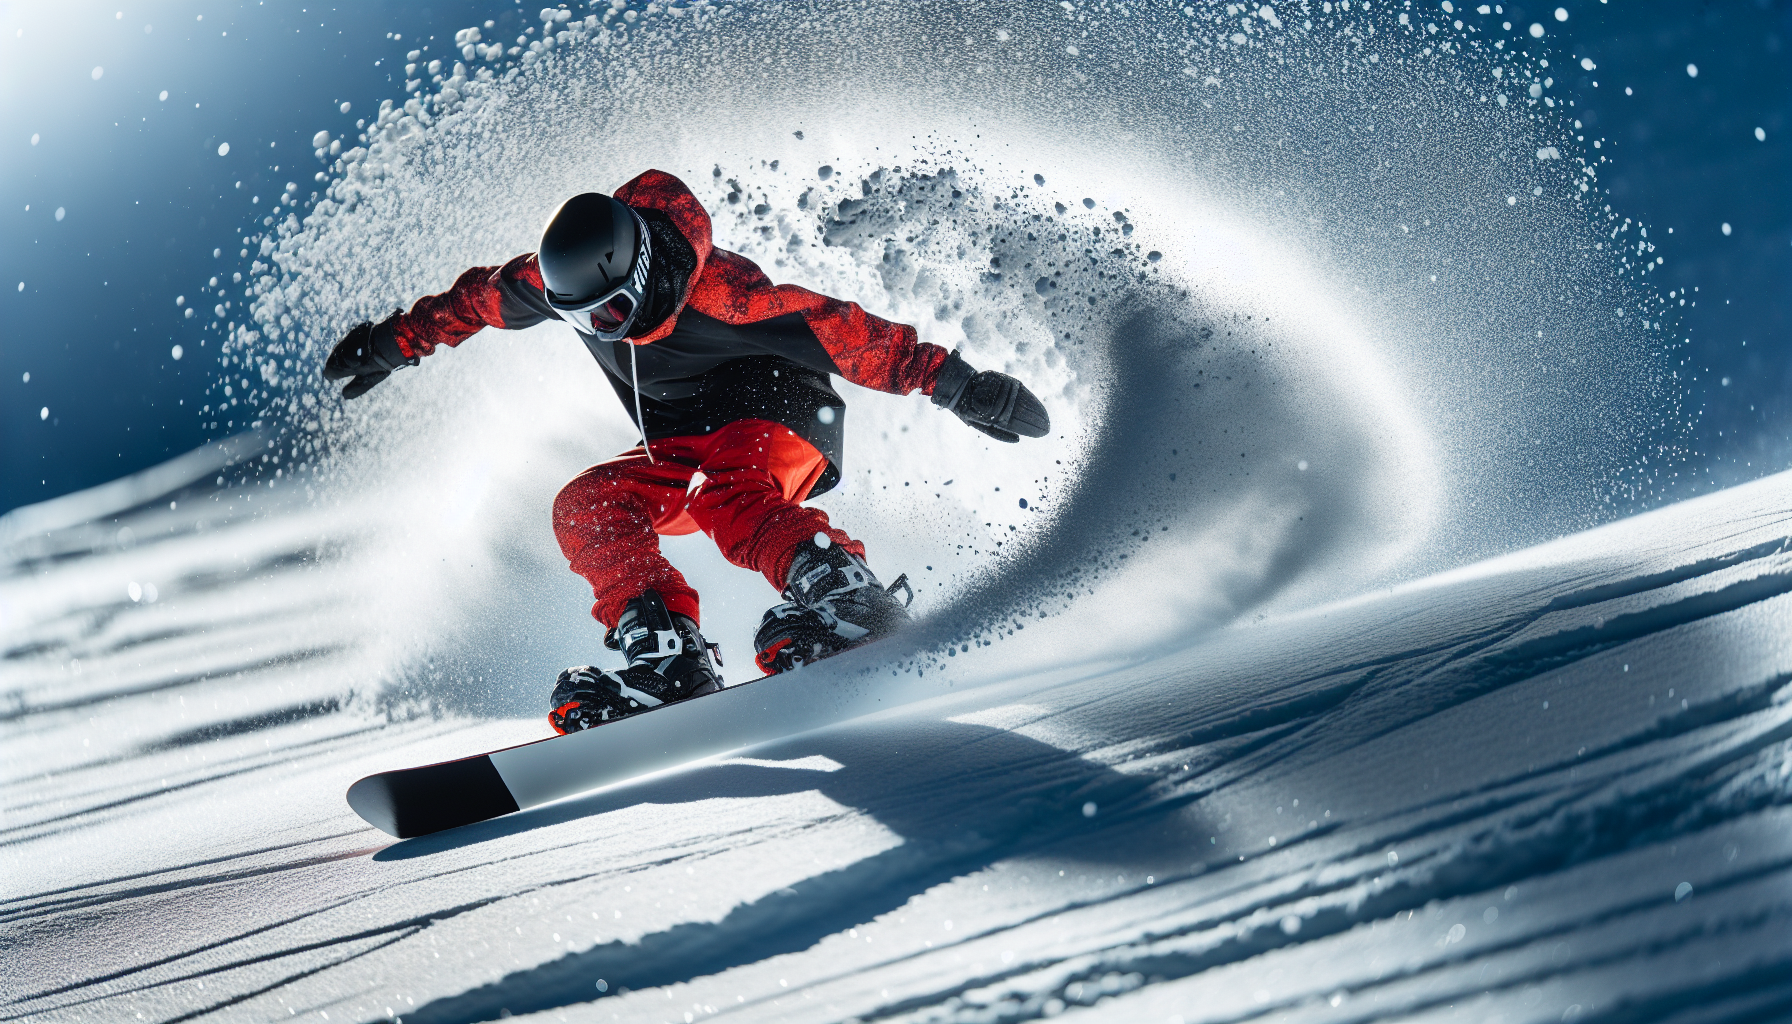 Snowboarder initiating a spin during buttering